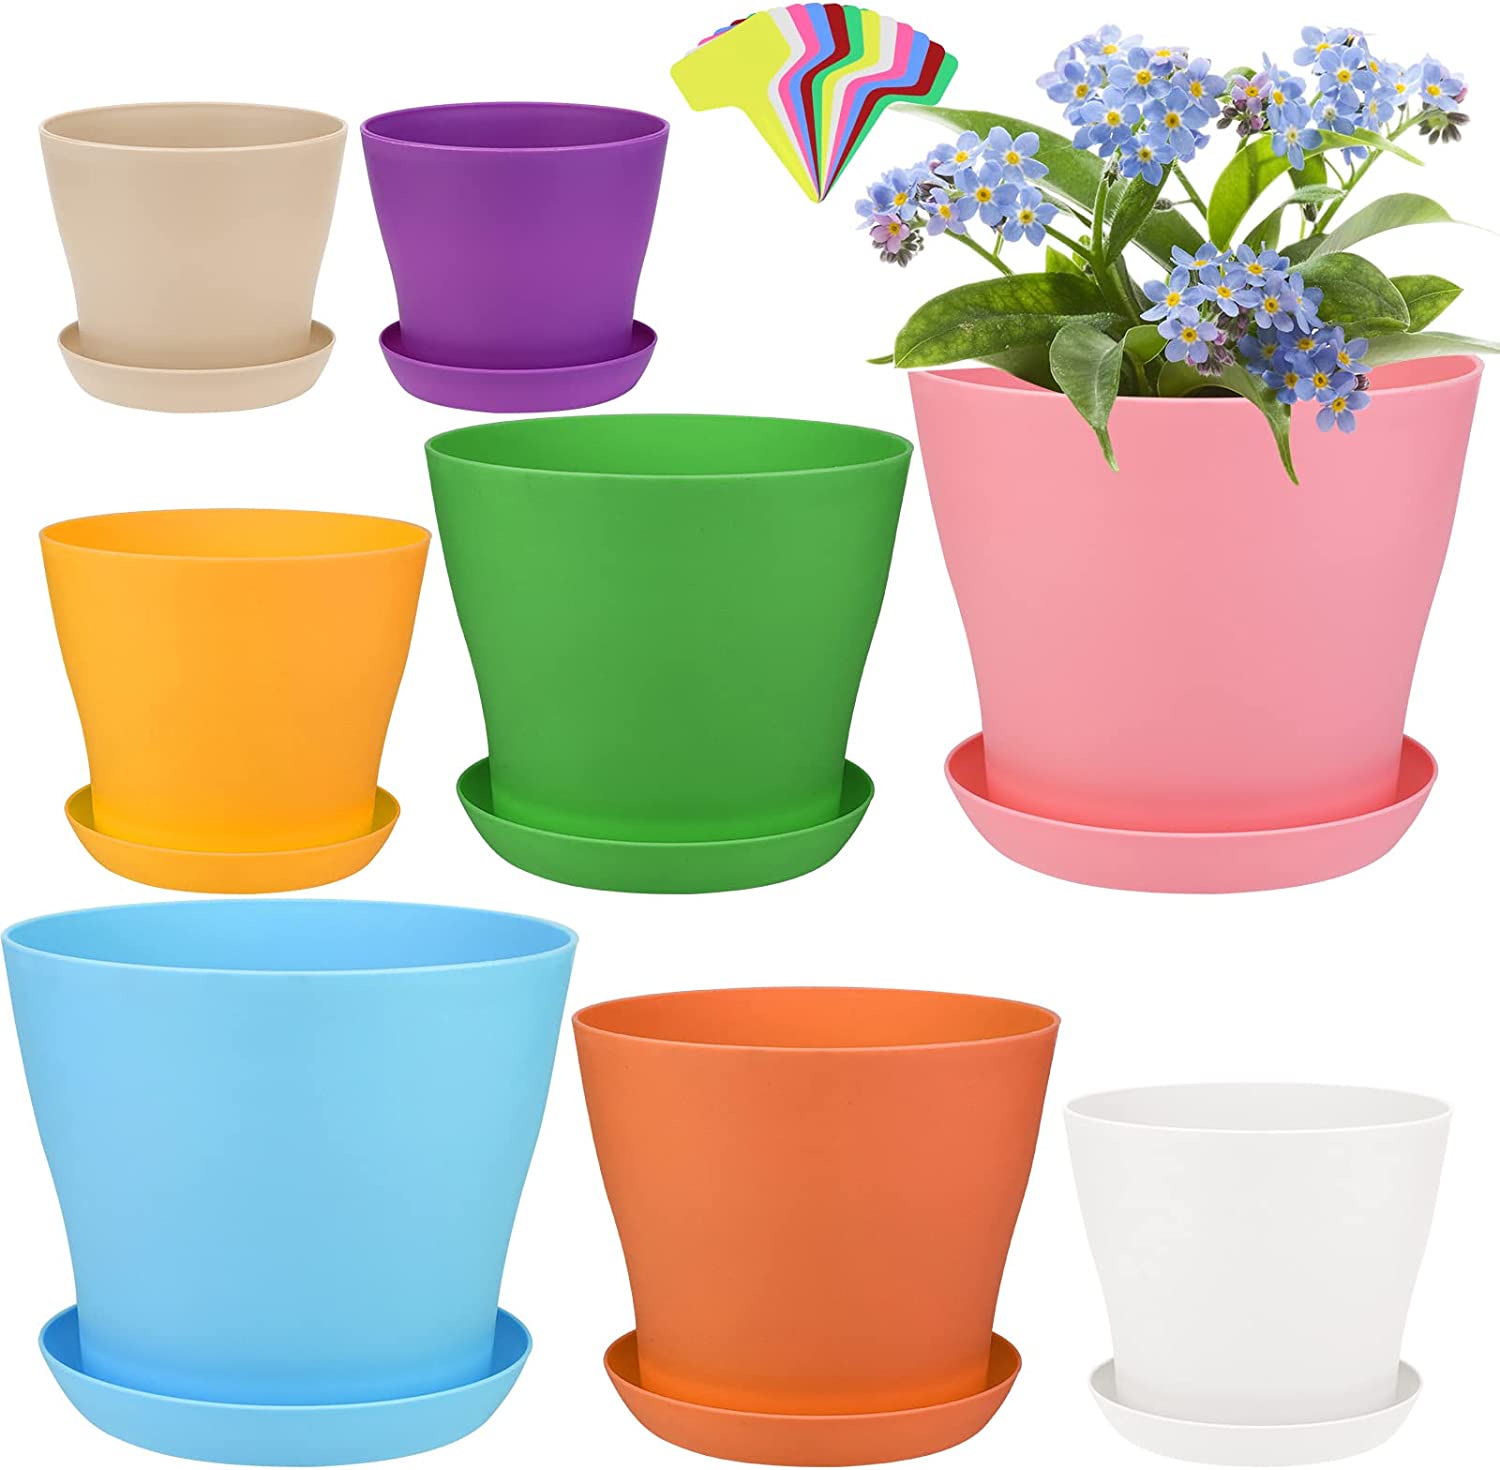 Bexikou Plant Pots, 8 Pack Plastic Flower Pots Outdoor Garden Planters with Multiple Drain Holes and Saucer -4.7 inch Indoor Small Plant Pots for All Home, Random Color - image 1 of 6